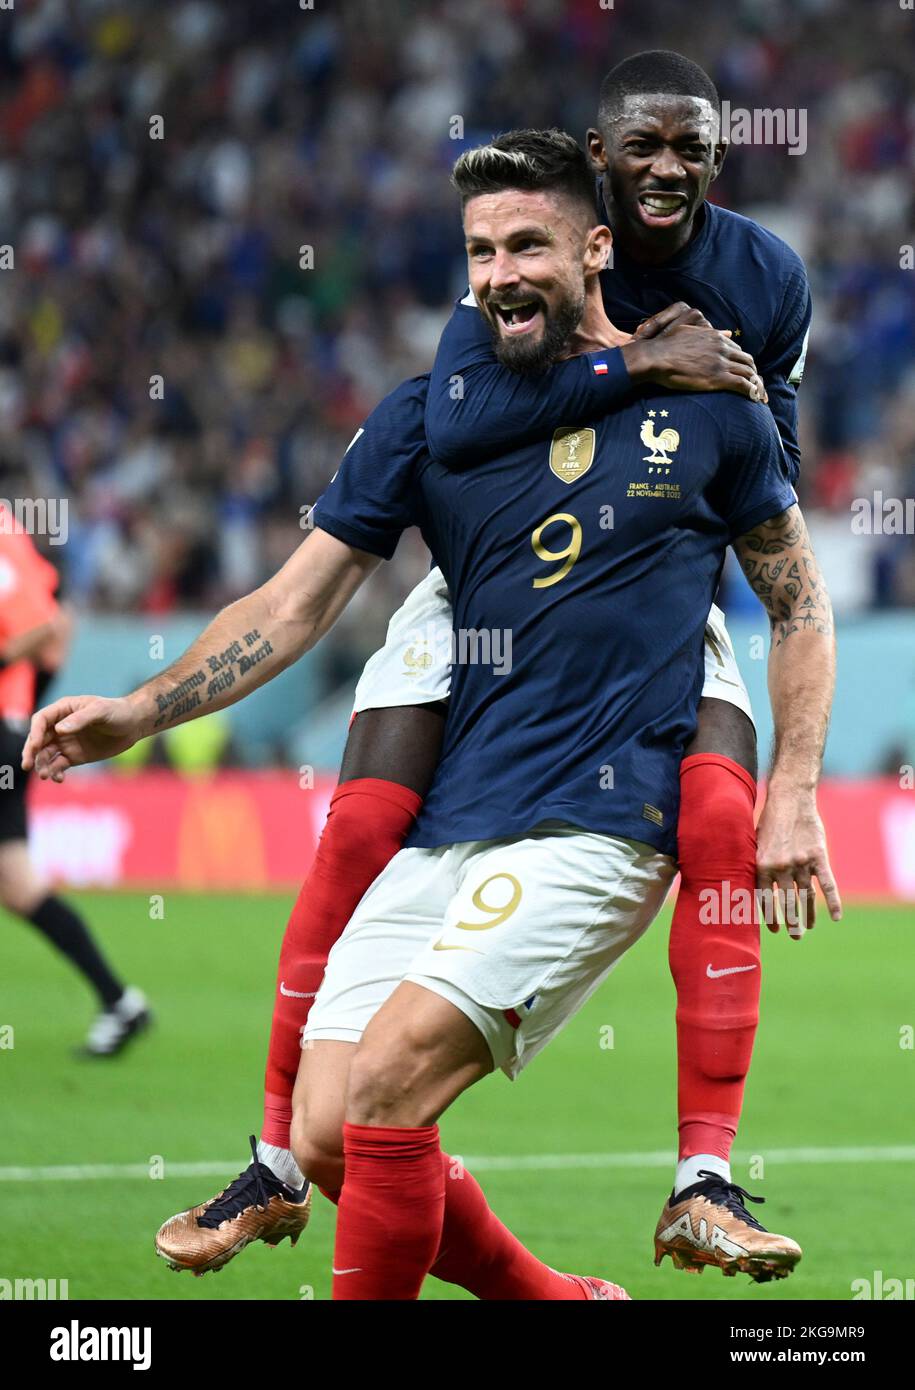 Al Wakrah, Qatar. 22nd Nov, 2022. Olivier Giroud (front) of France celebrates his goal with Ousmane Dembele of France during the Group D match between France and Australia of the 2022 FIFA World Cup at Al Janoub Stadium in Al Wakrah, Qatar, Nov. 22, 2022. Credit: Xiao Yijiu/Xinhua/Alamy Live News Stock Photo